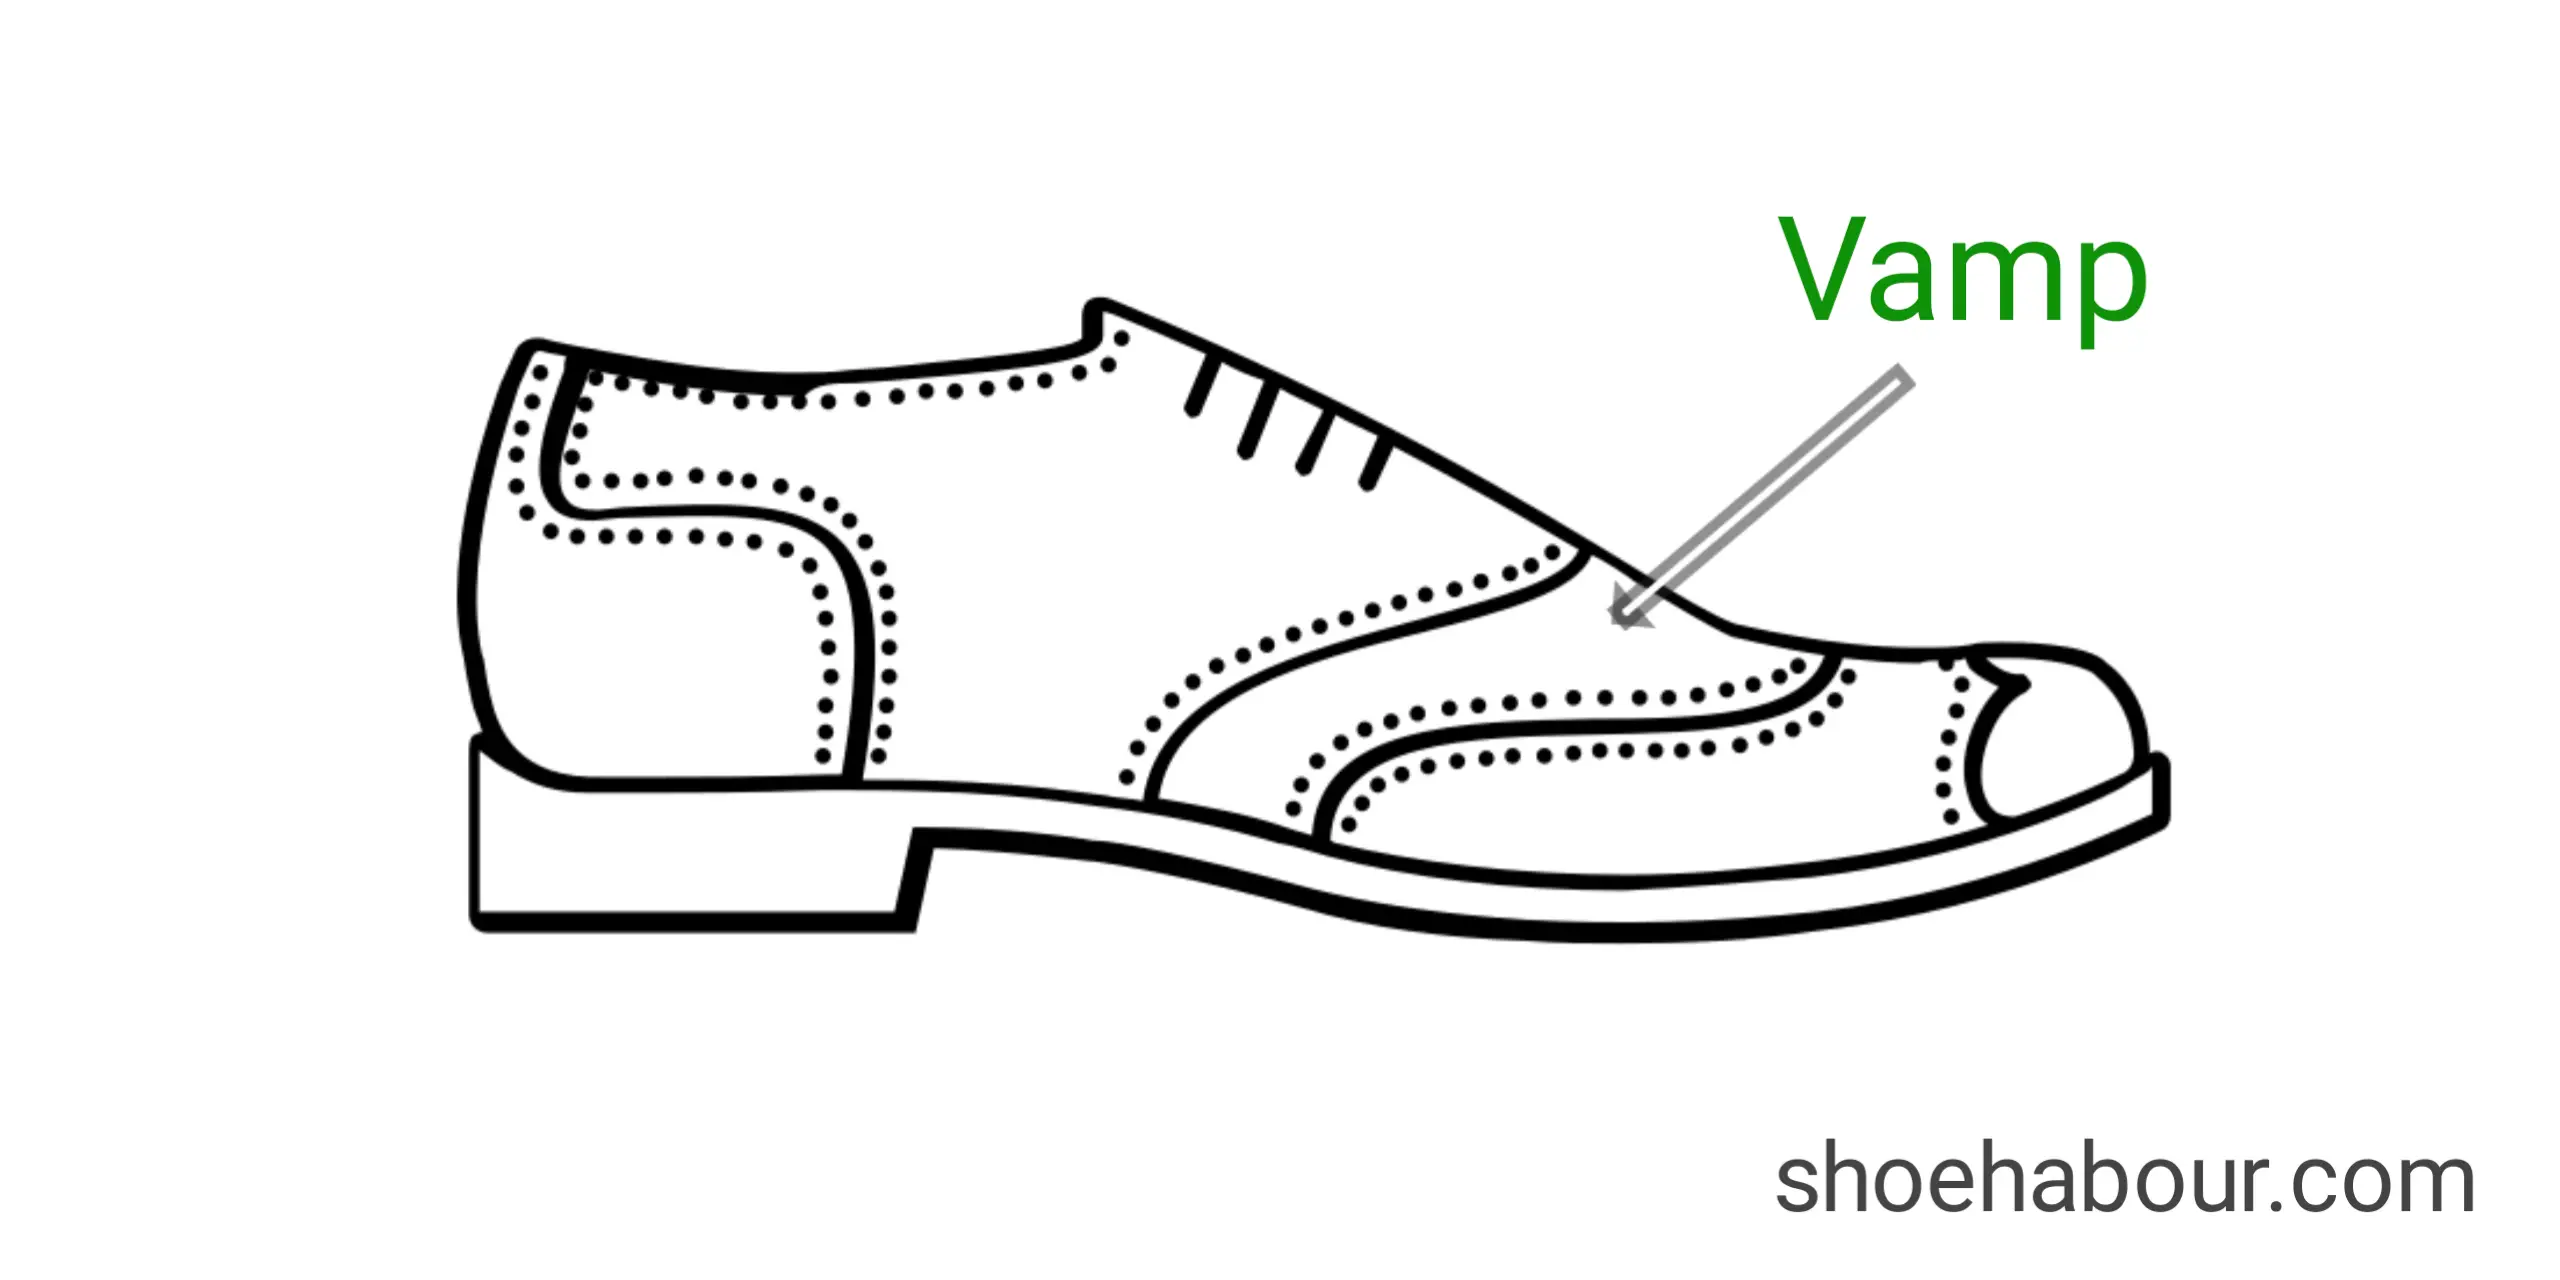 Vamp of a shoe